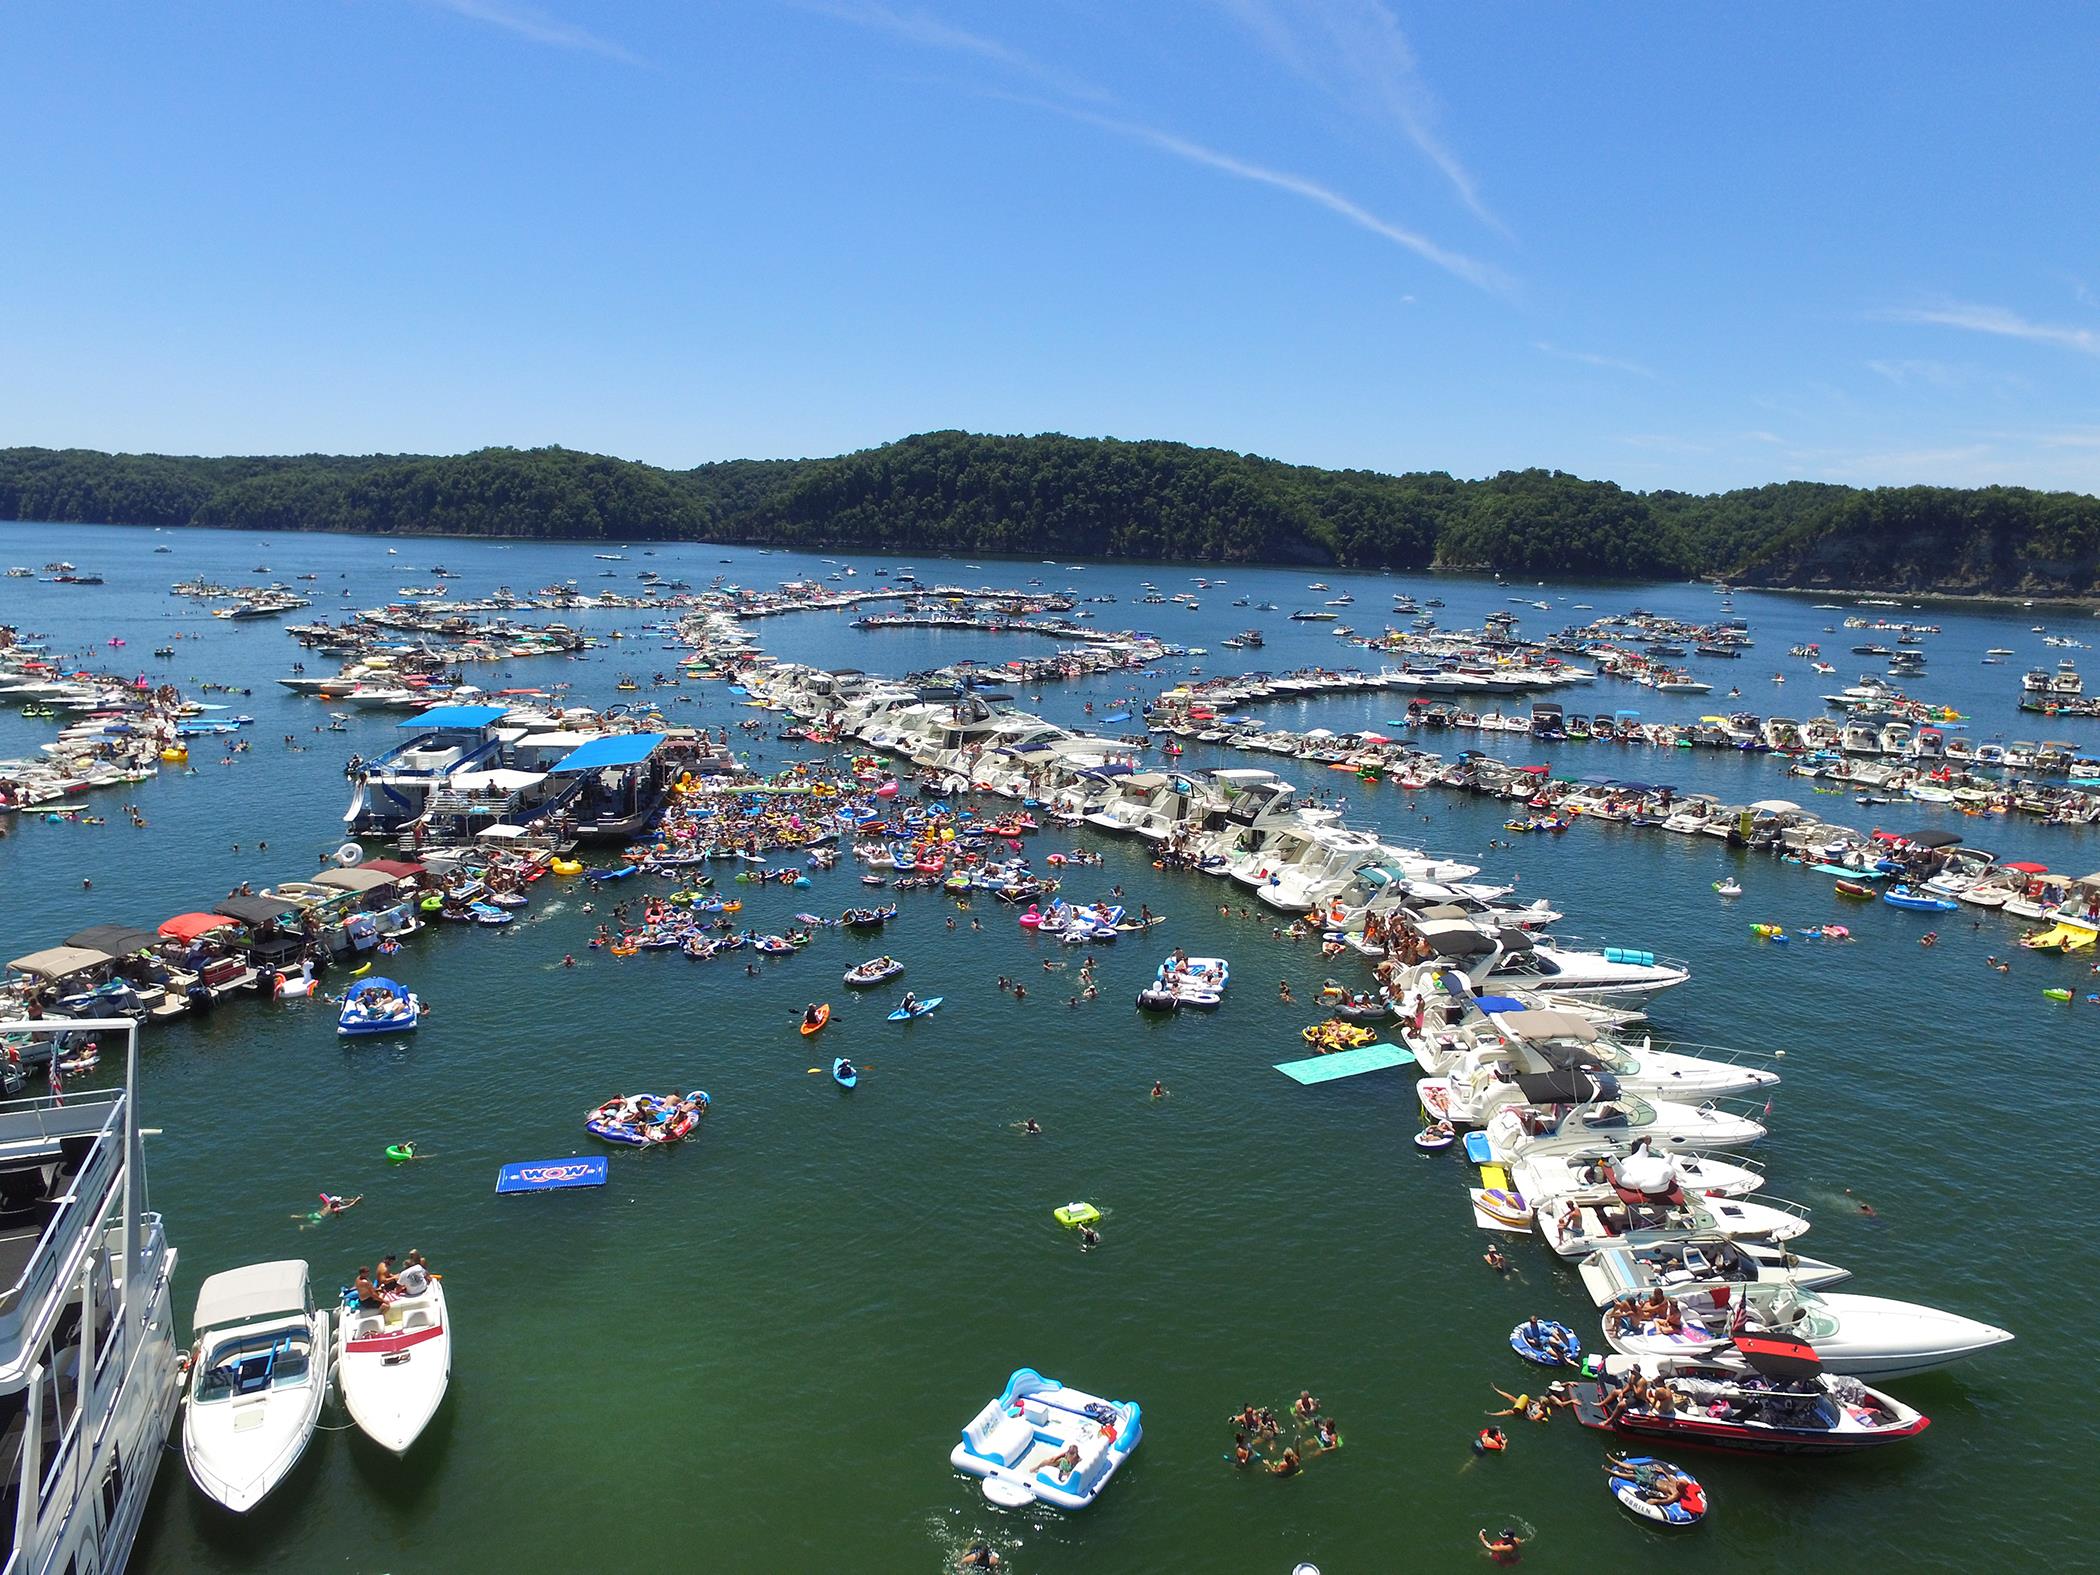 Lake homes for sale on lake cumberland offer access to this beautiful lake